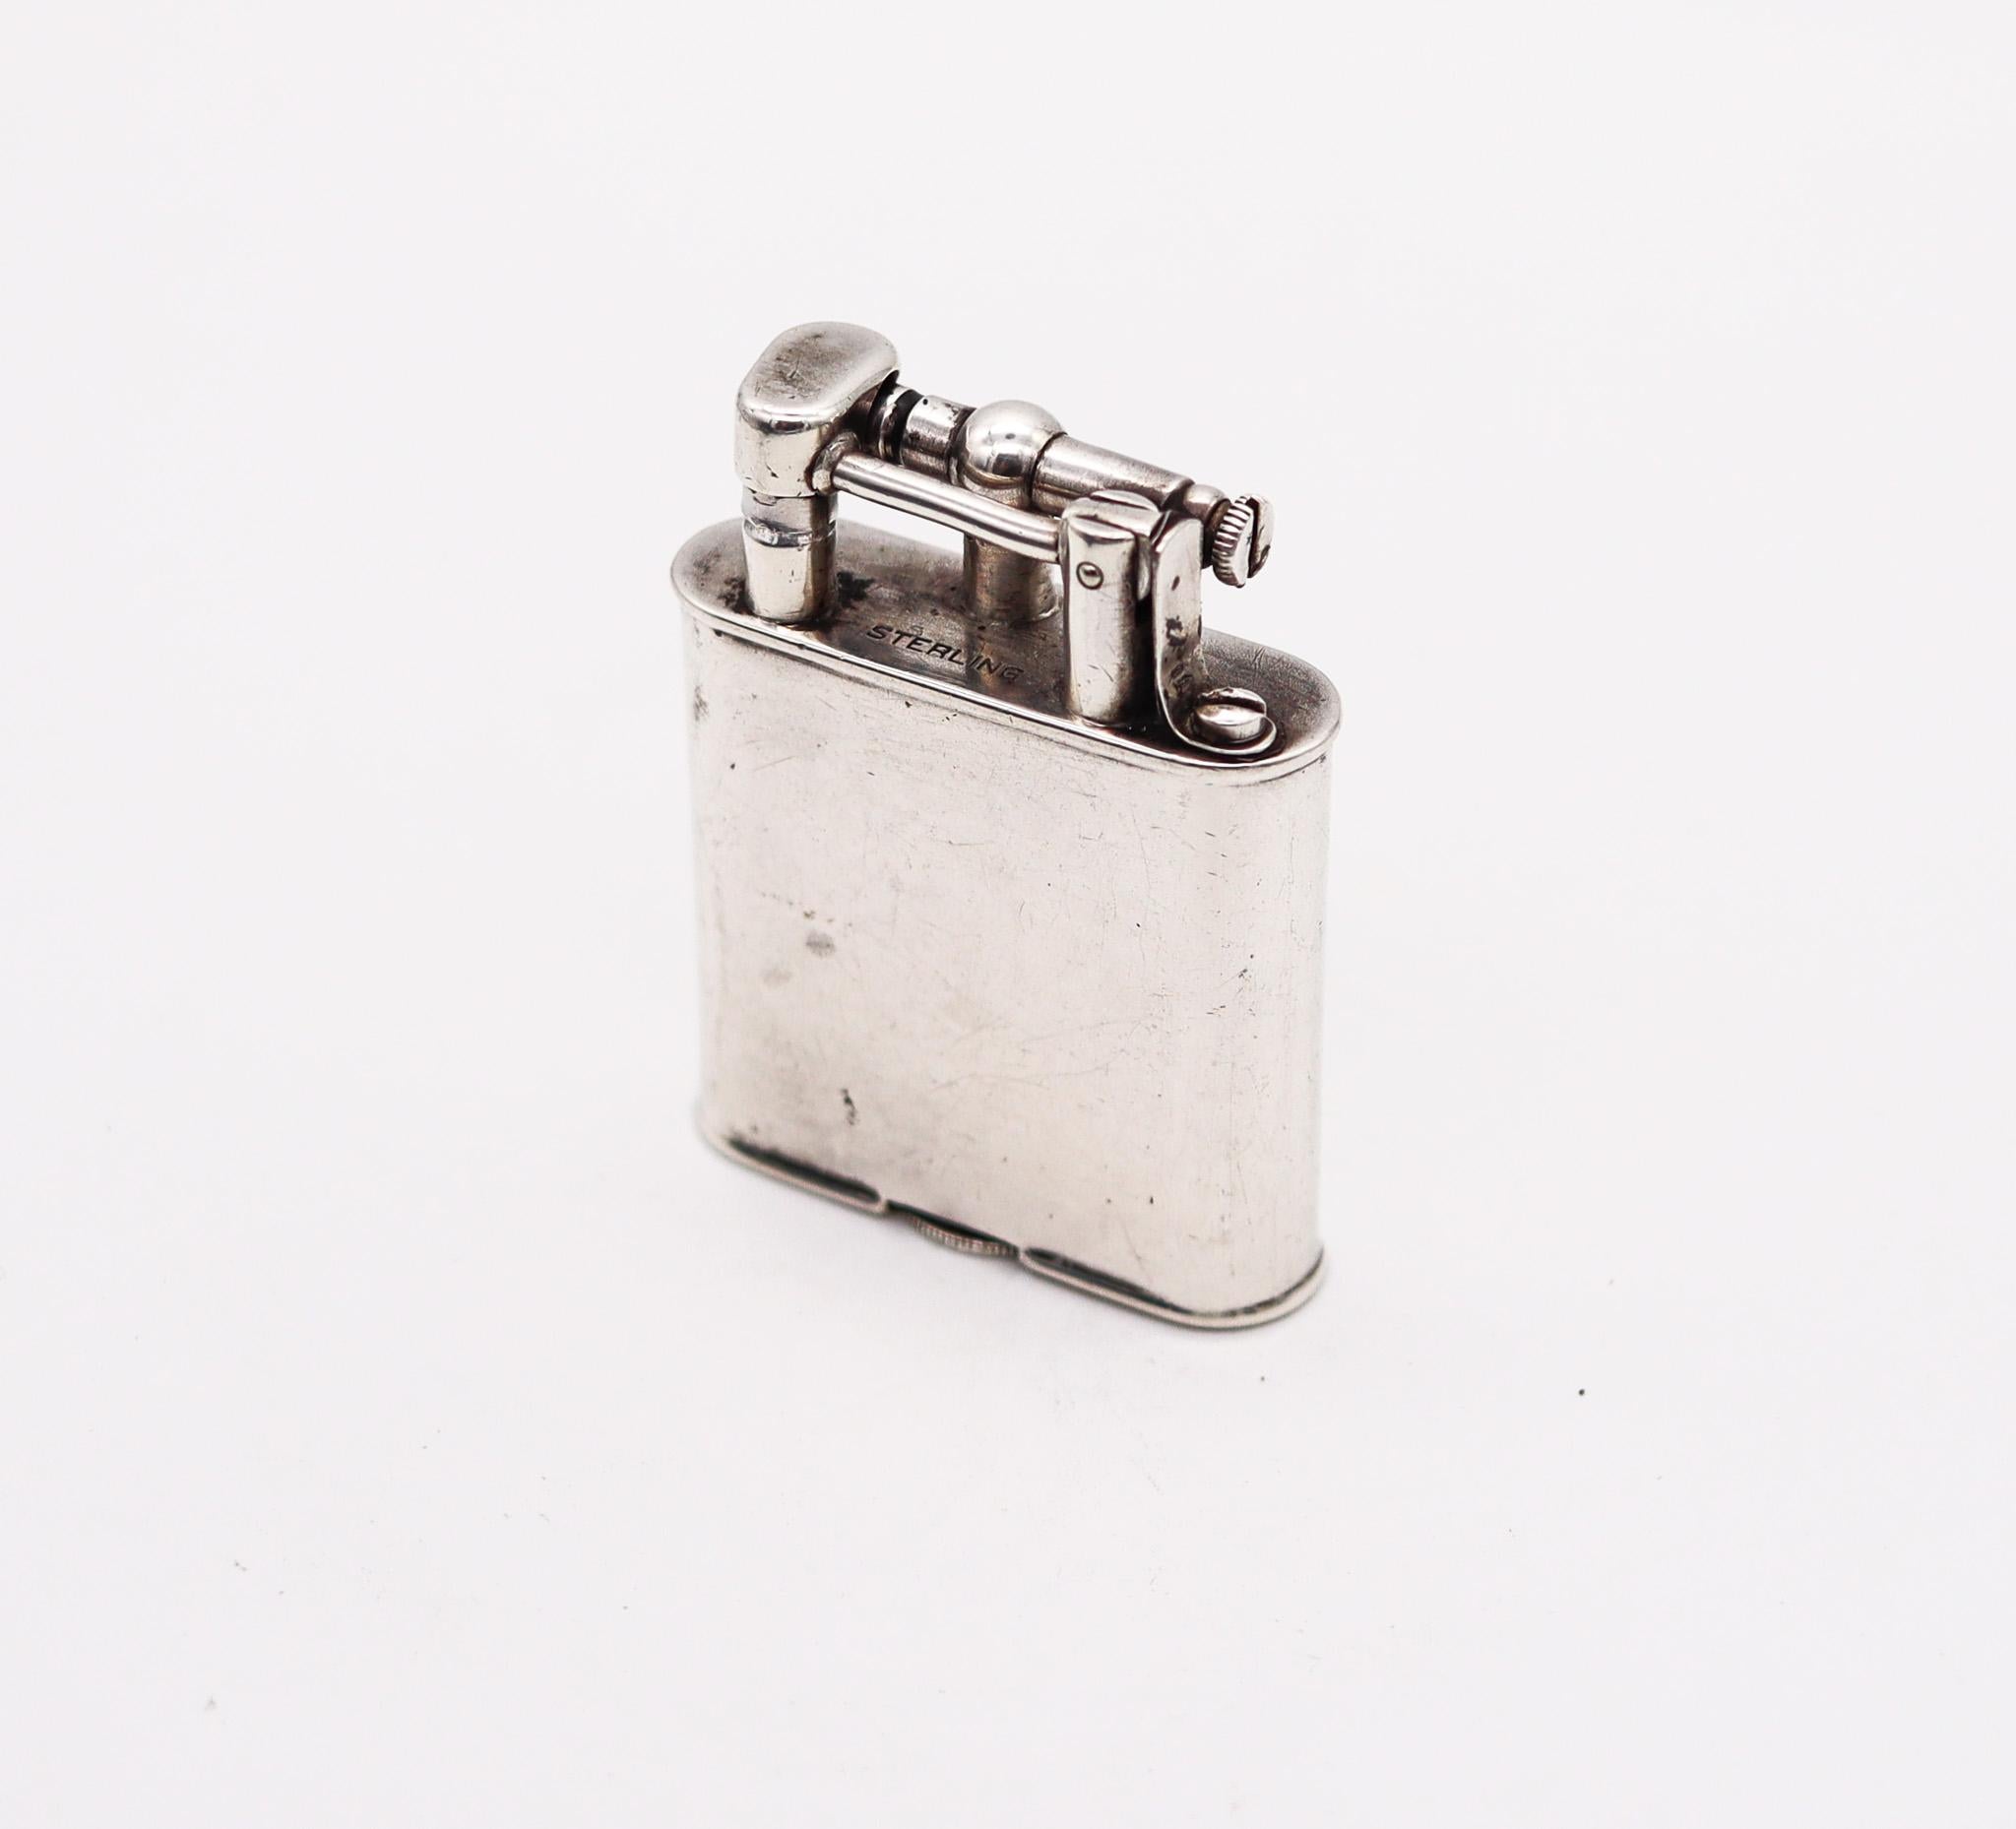 Unique petrol lighter designed by Dunhill.

Beautiful lift arm petrol lighter, designed by the Alfred Dunhill Company during the Art Deco period, circa 1927-30. It was crafted in solid .925/.999 sterling silver with high polished finish. In 1927,